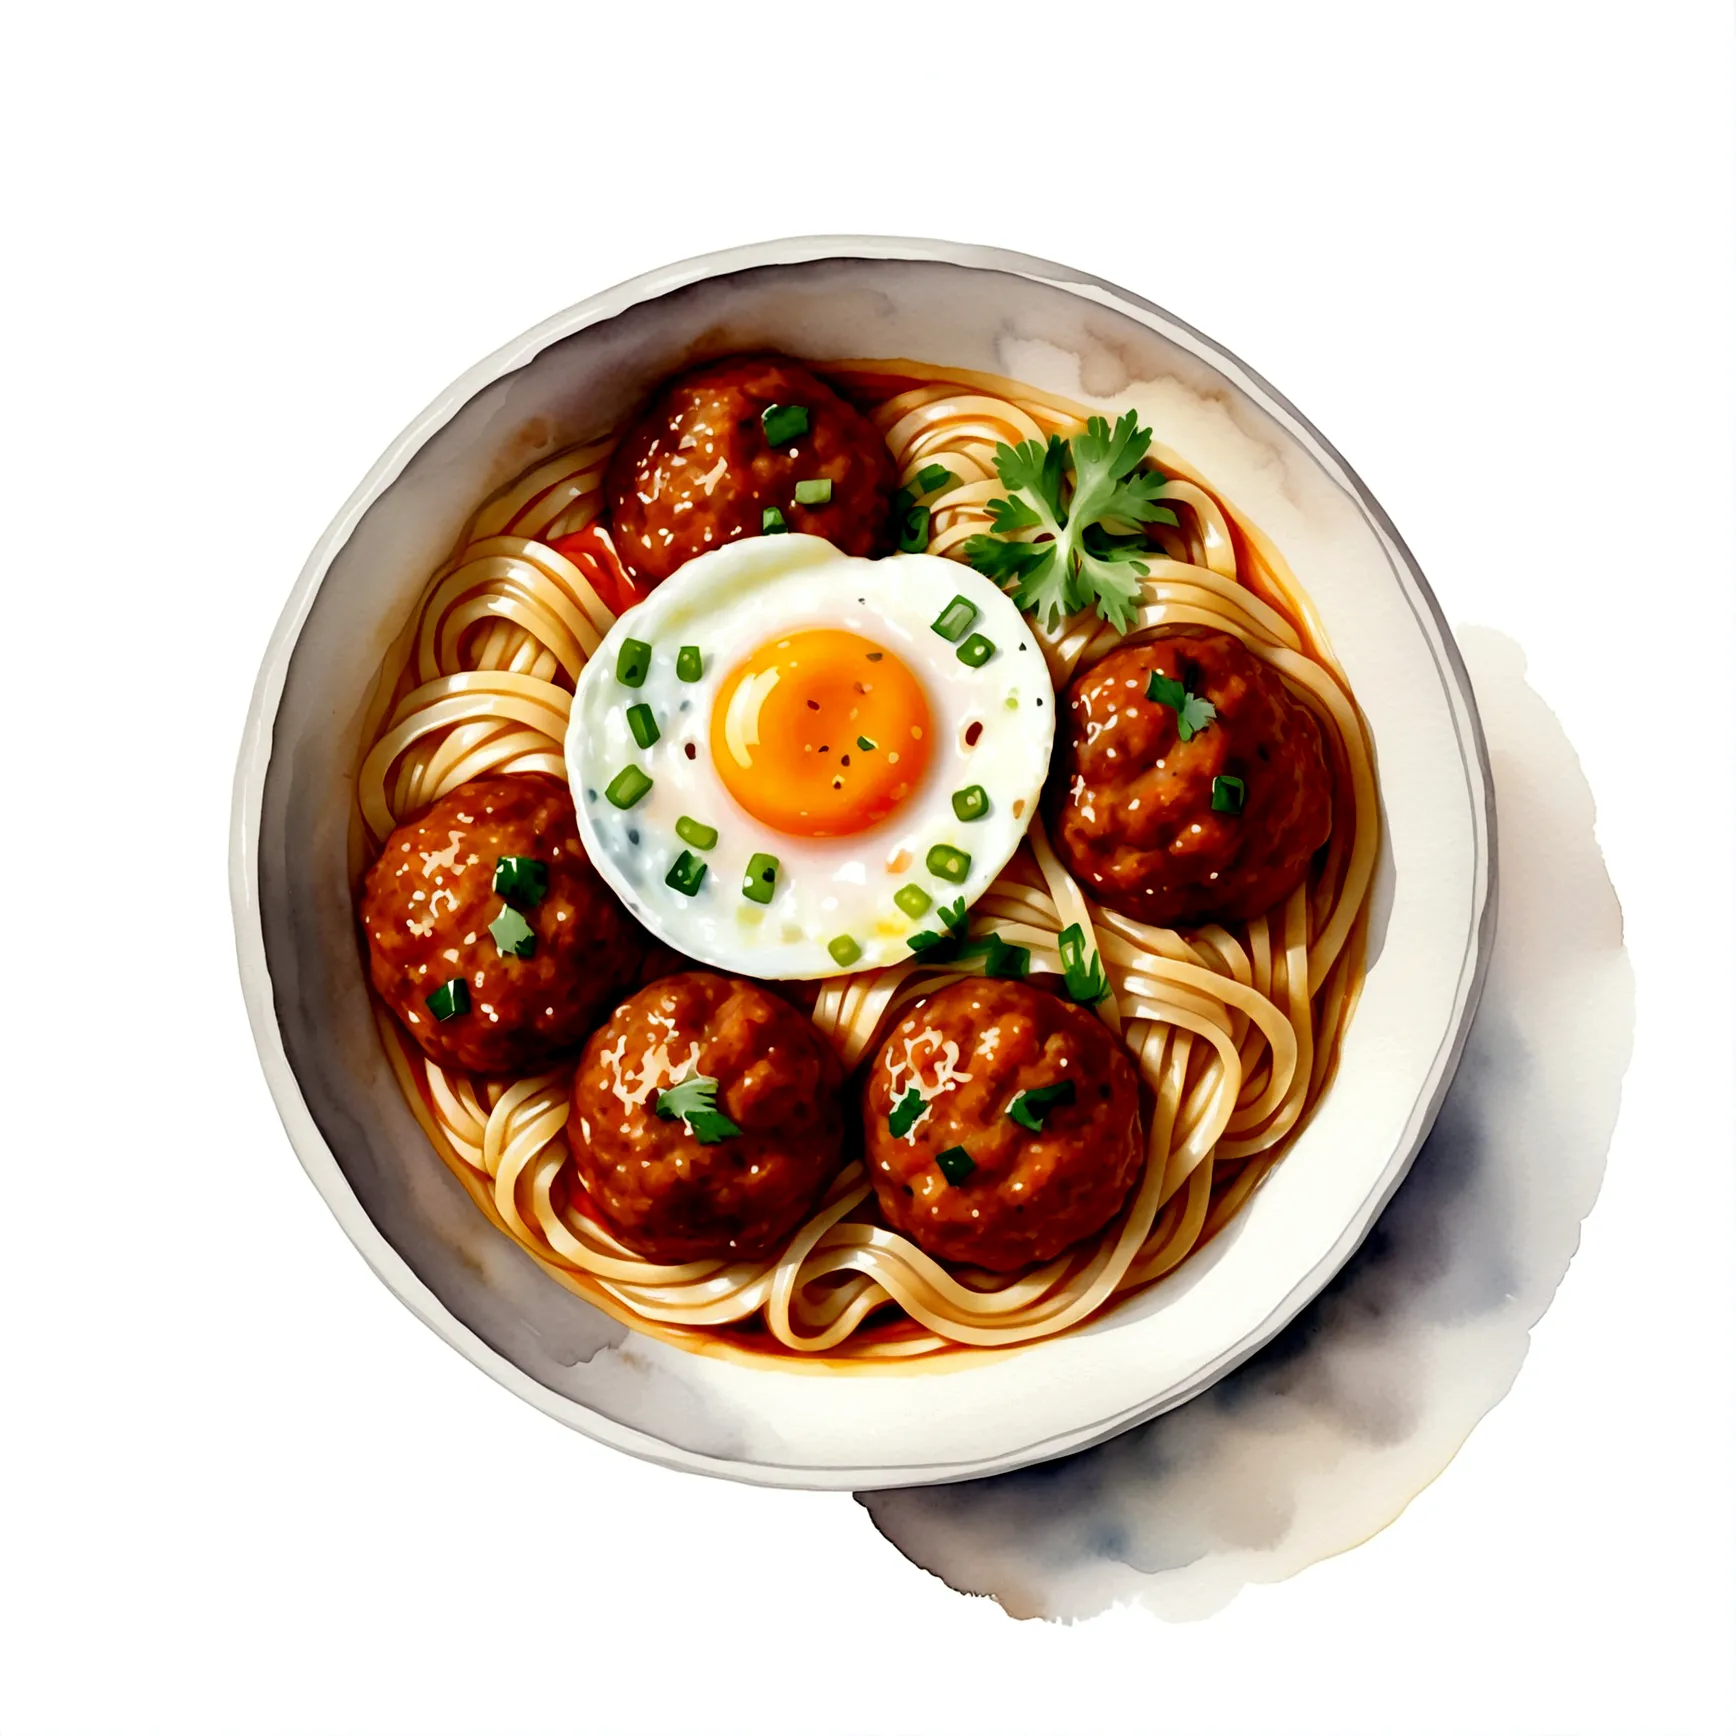 there is a huge extremely delicious bowl of noodle with meatballs and egg, illustration, isolated with solid white background, s...